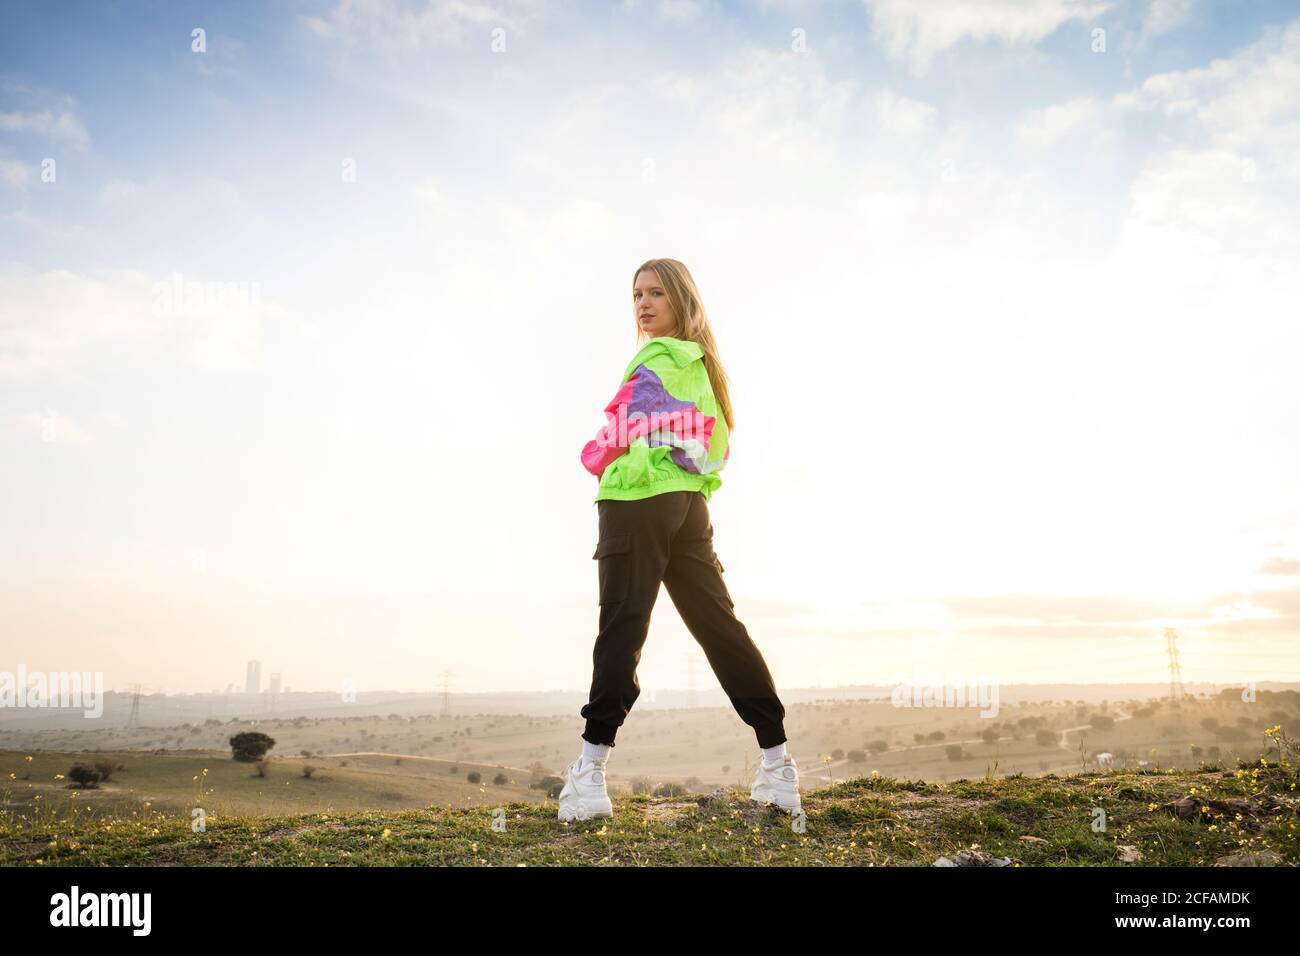 Back view of contemporary blond haired young Woman in pink bra with colorful jacket looking at camera with remote land on background Stock Photo